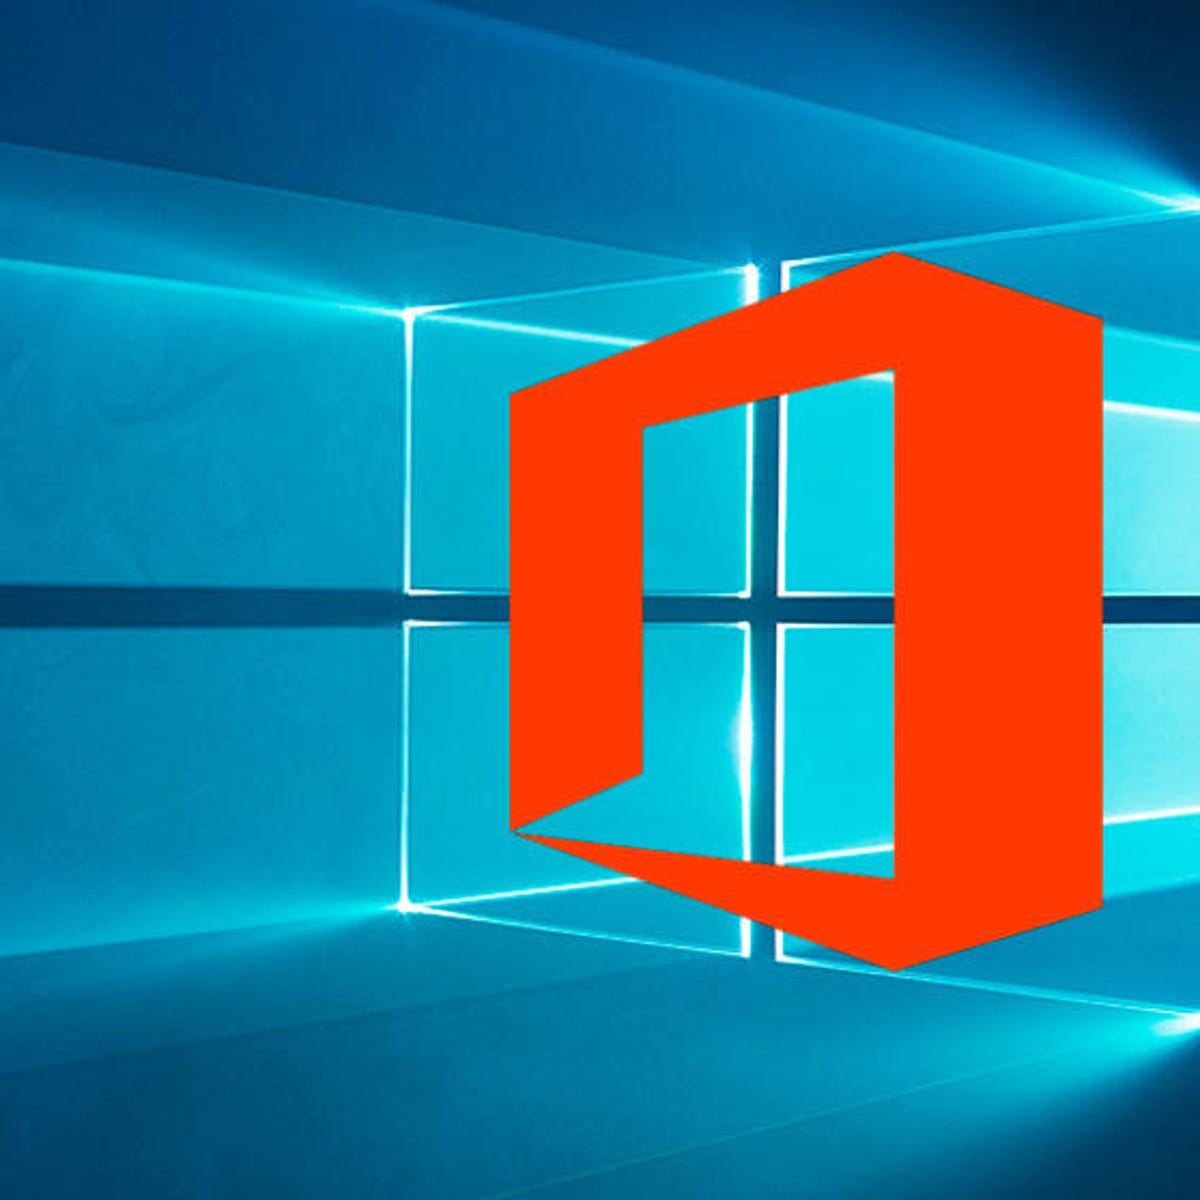 Microsoft adds Office Hub app to Windows 10 preview | ZDNET